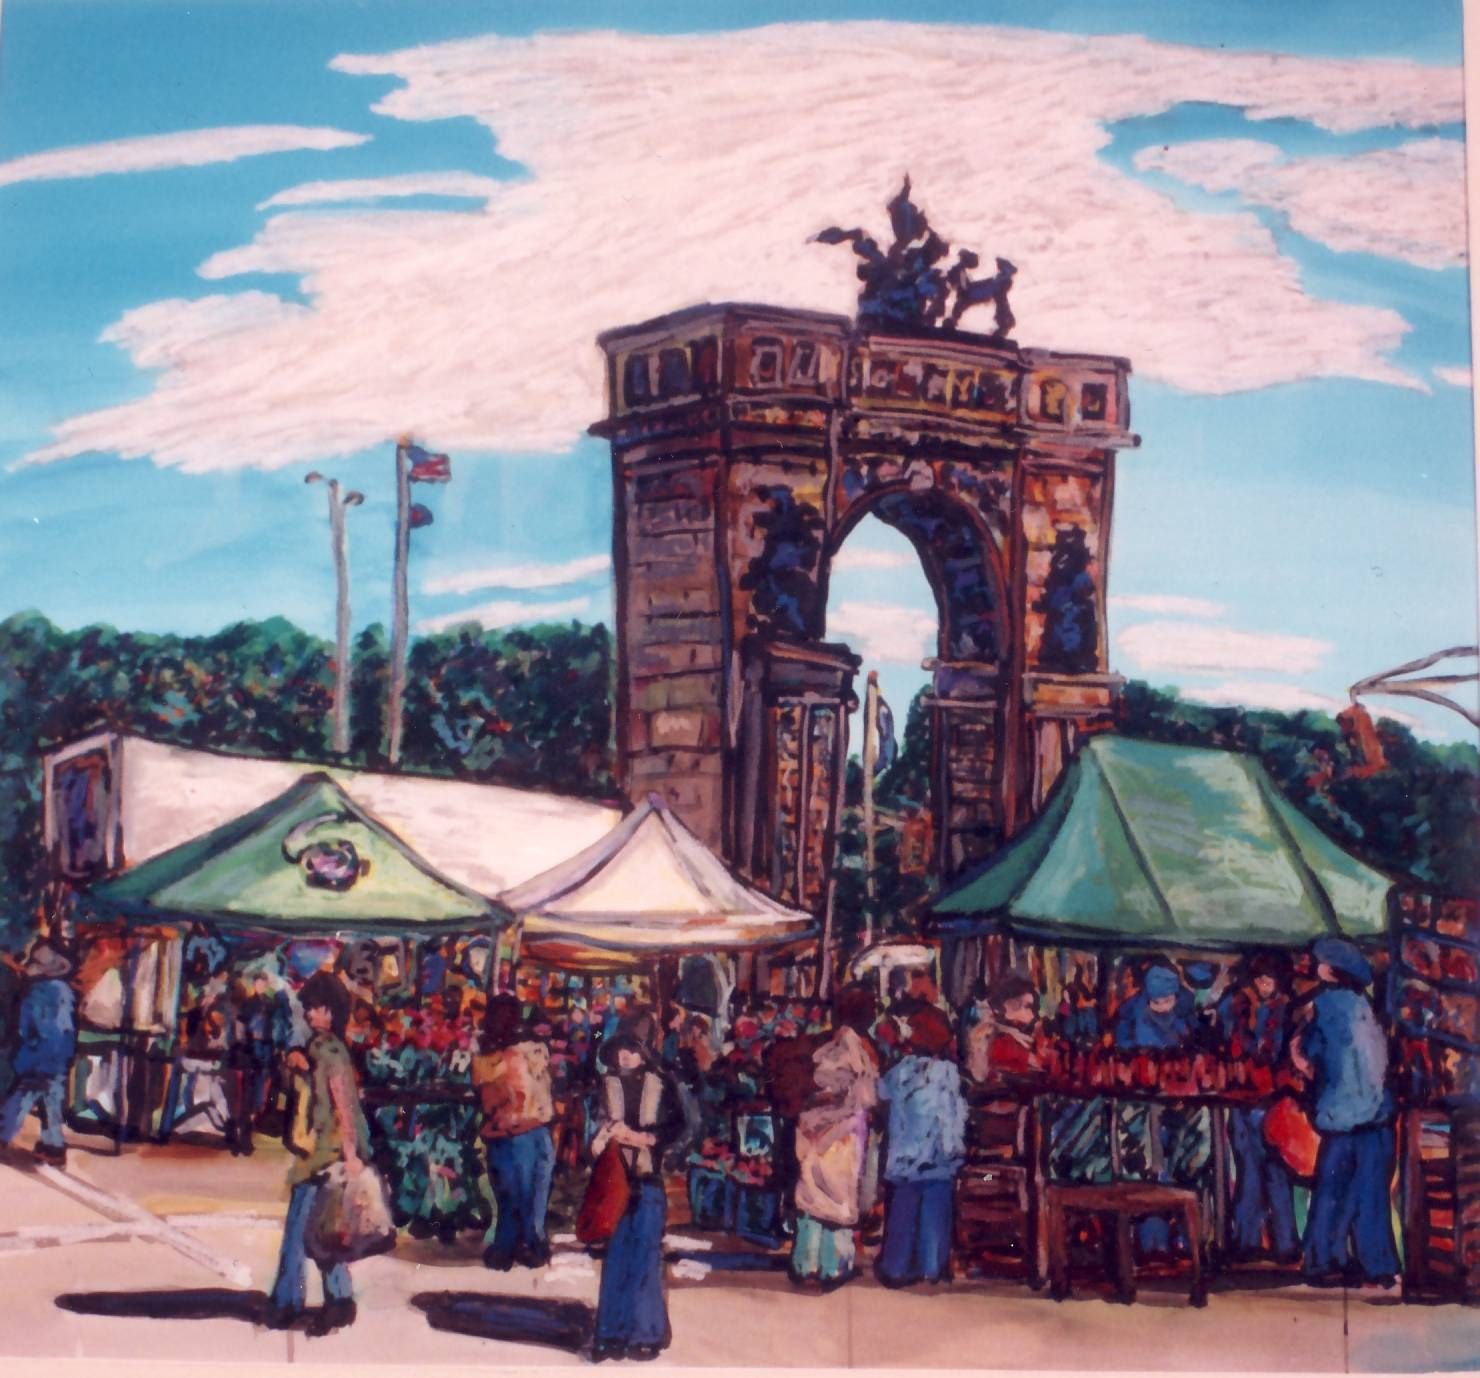 The central arch of Grand Army Plaza looms above green and white vendor tents, with many people milling about between them.